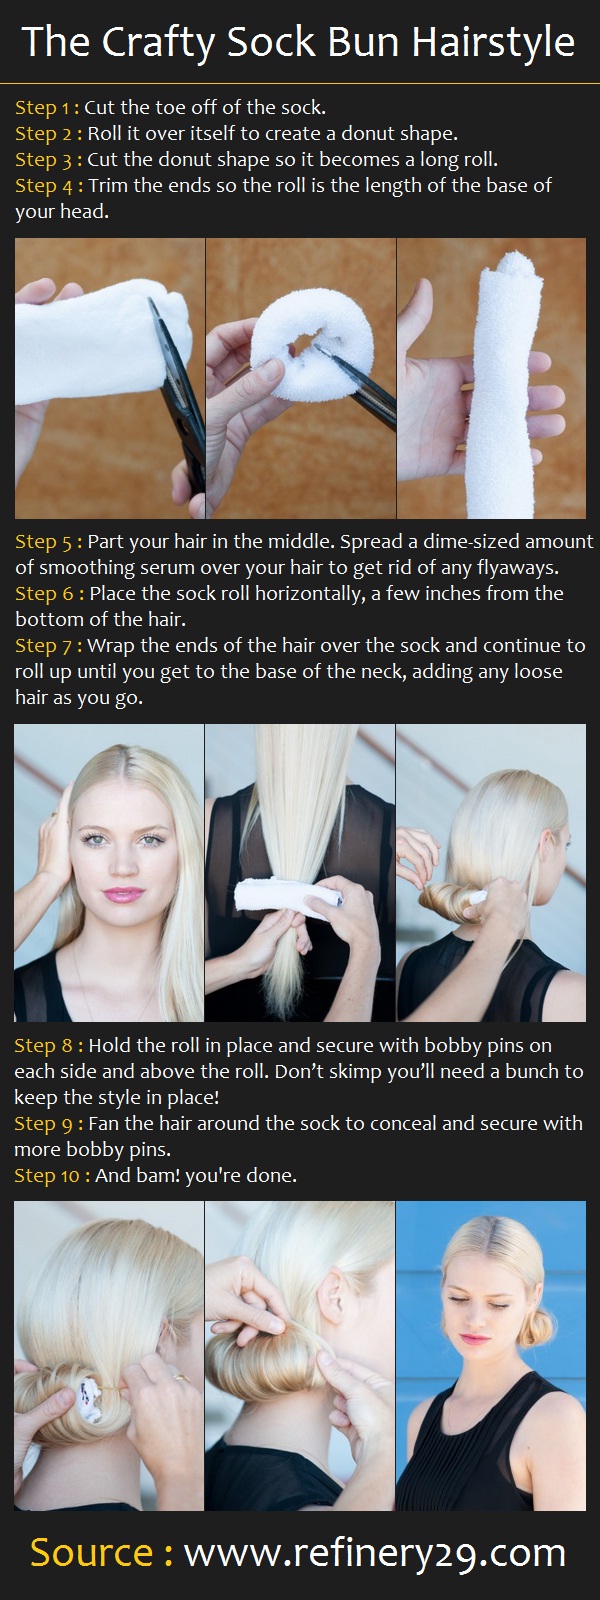 18 Great Ideas and Tutorials for Sophisticated Hairstyle (16)